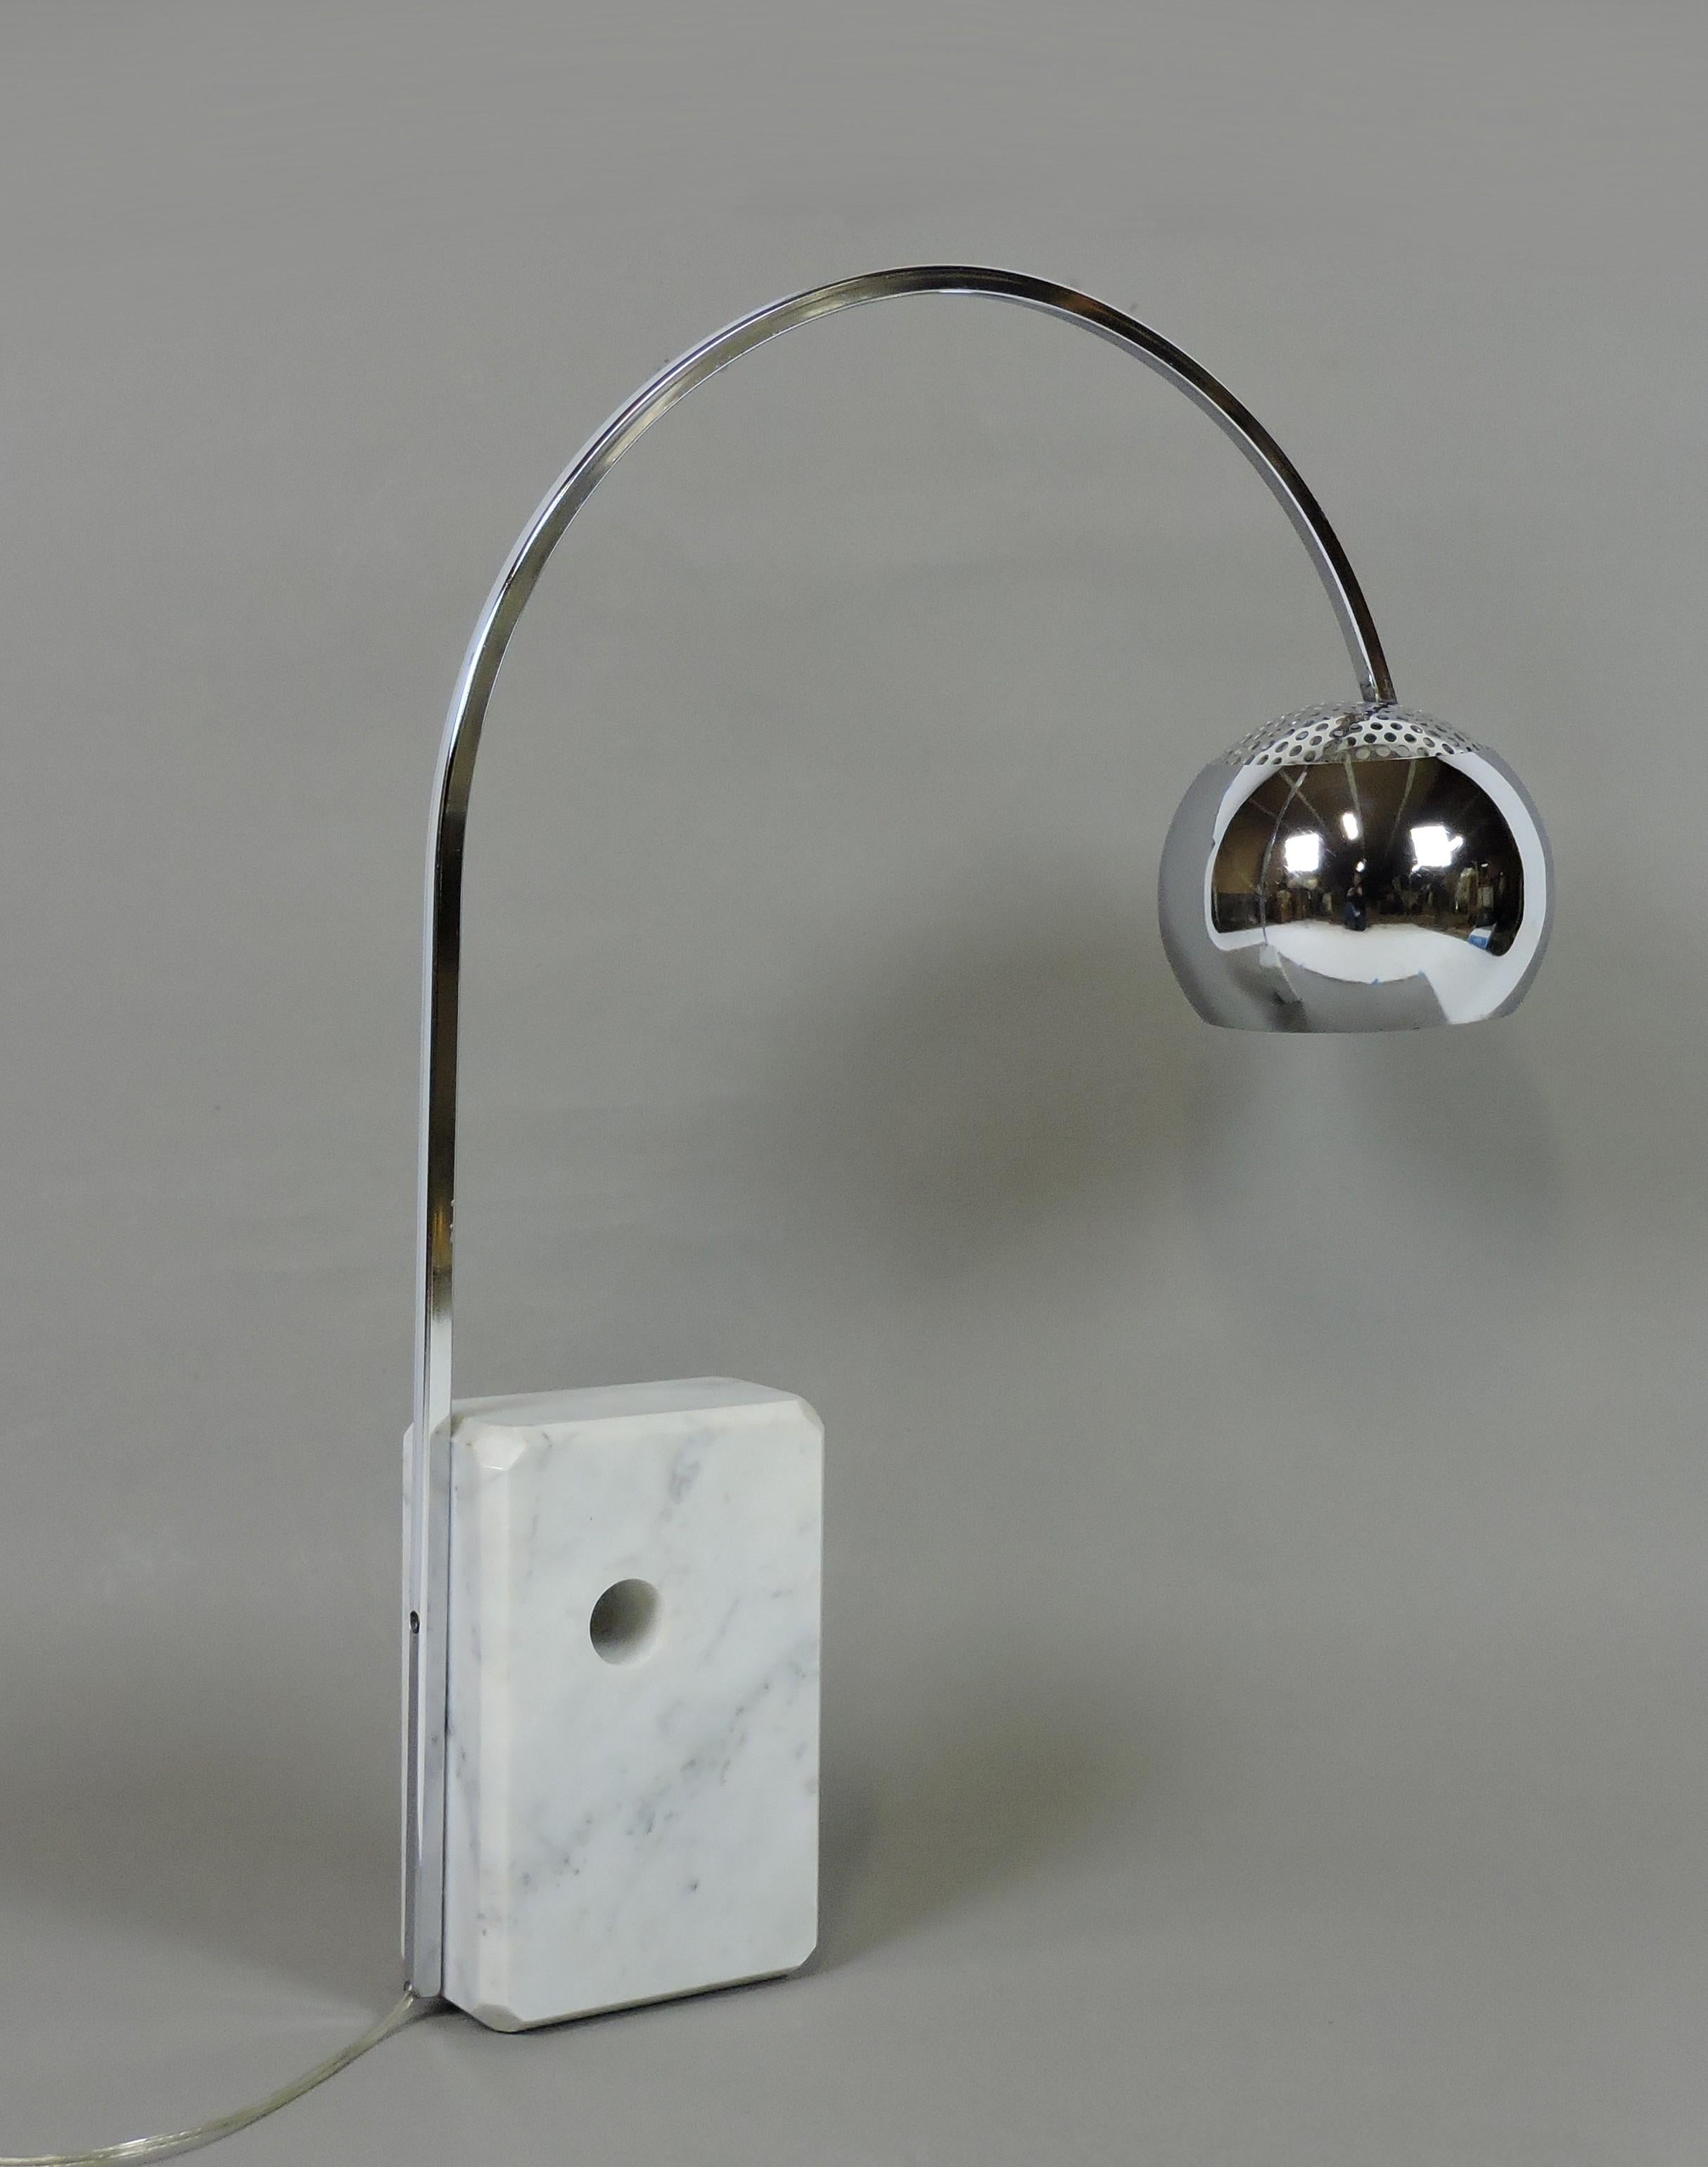 Beautiful and hard to find mini version of the classic Italian Arco floor lamp designed by the Castiglioni brothers. This lamp has a polished beveled edge Carrara marble base and a chrome arc and shade. Takes a single standard base bulb and the